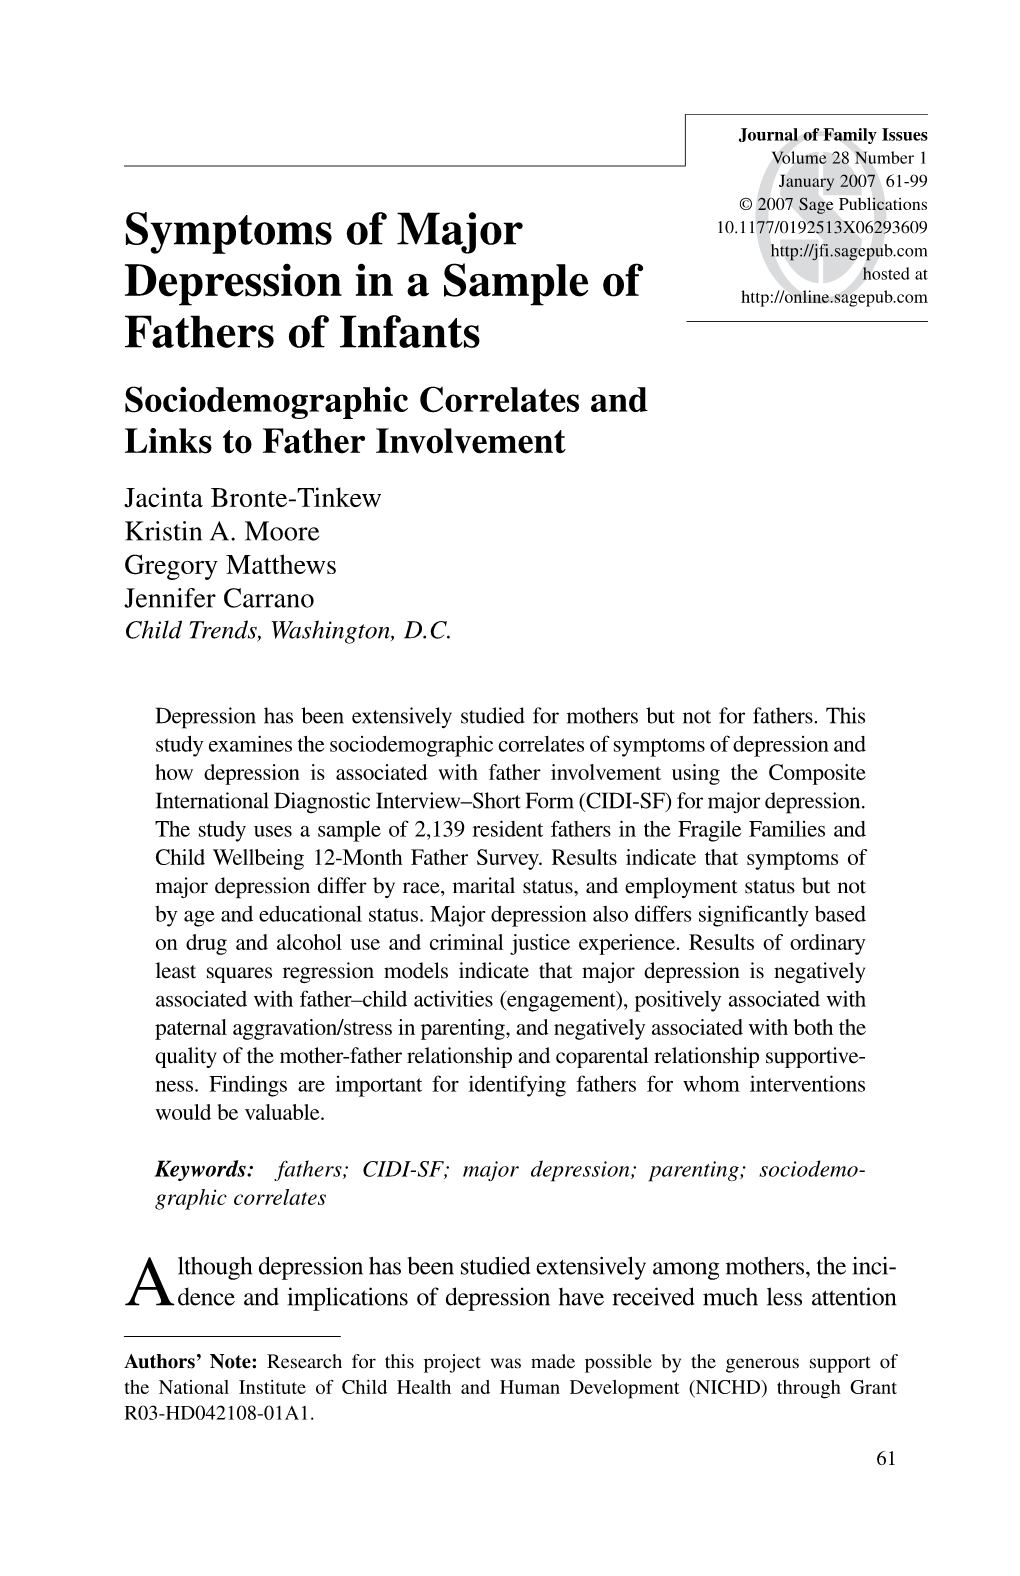 Symptoms of Major Depression in a Sample of Fathers of Infants